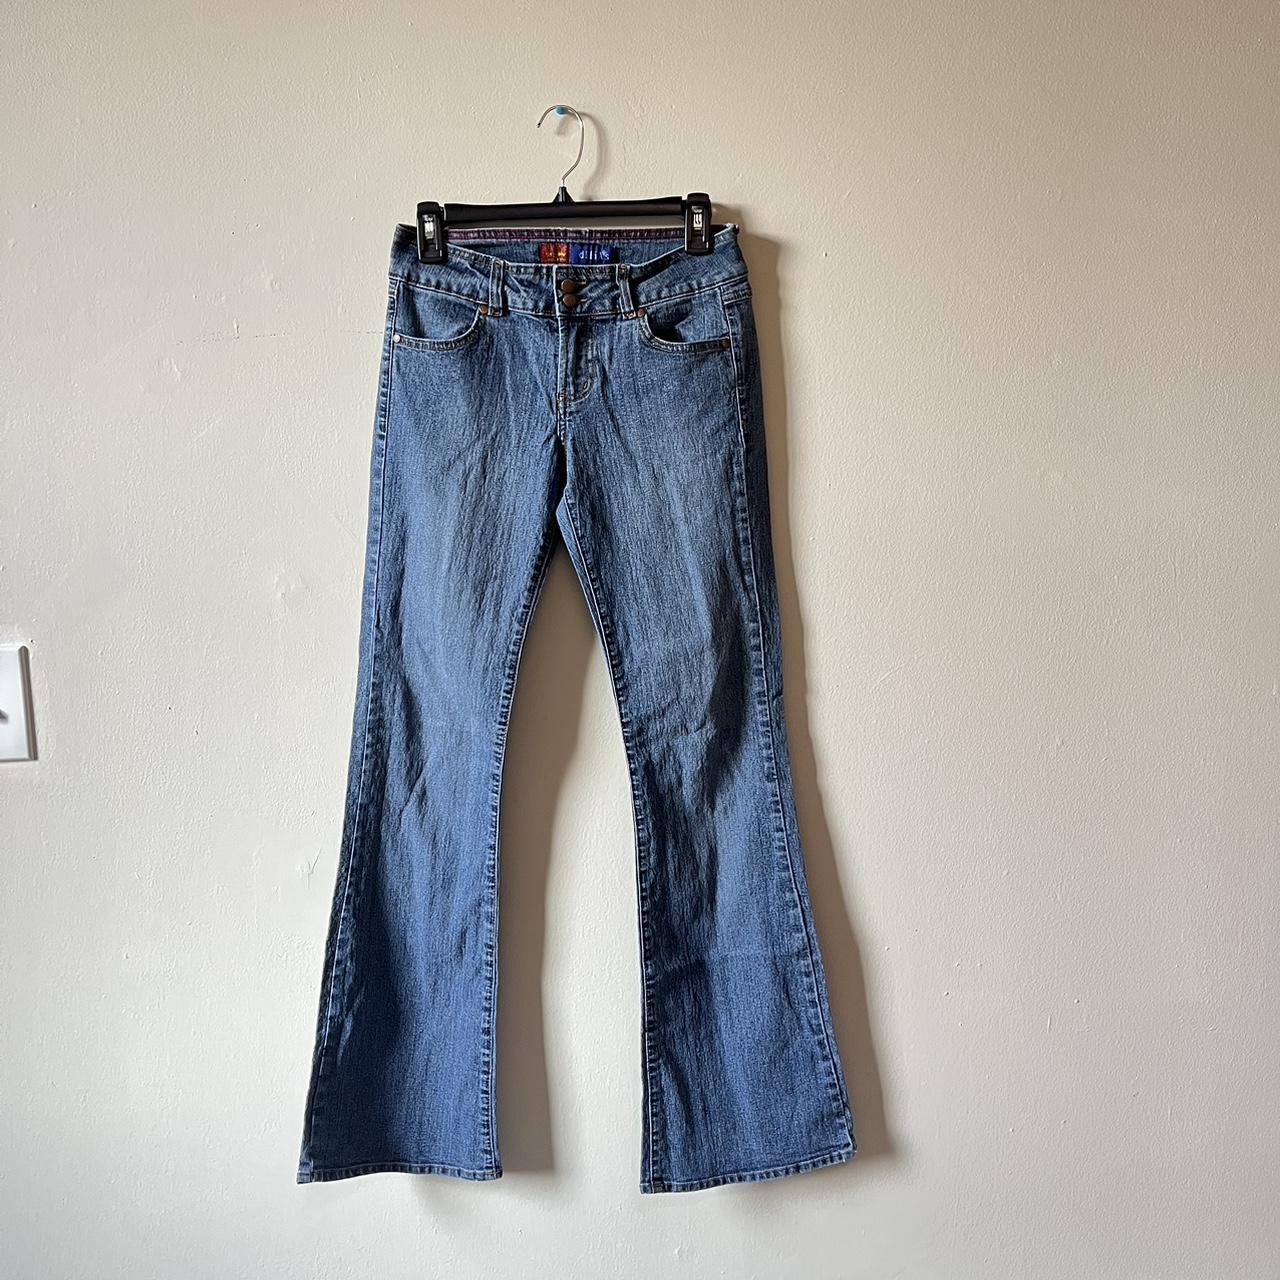 RSQ ripped jeans 90s style In great condition - Depop